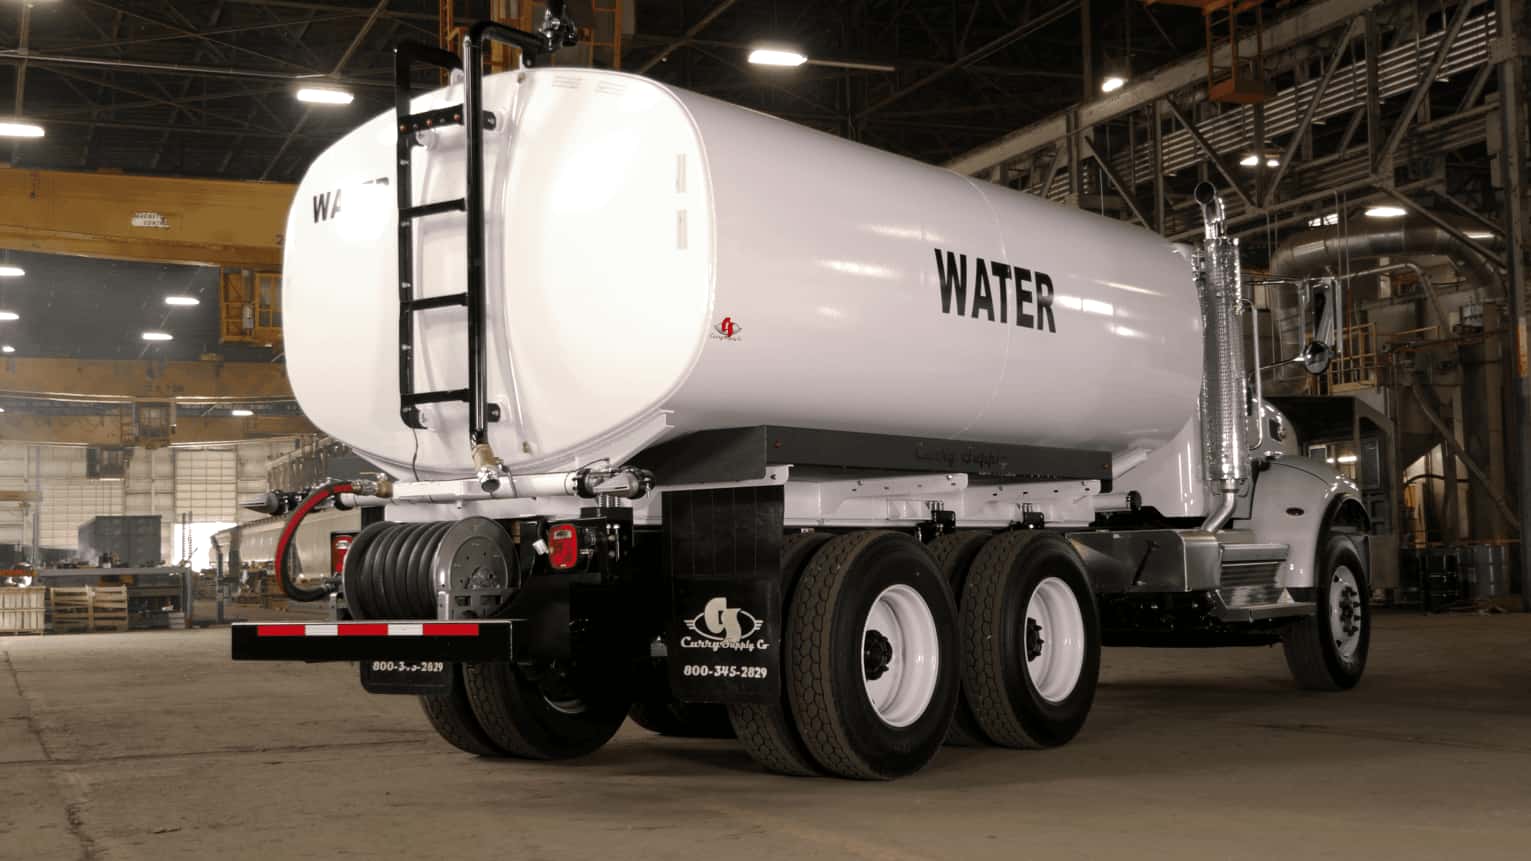 Considerations for Purchasing Water Trucks